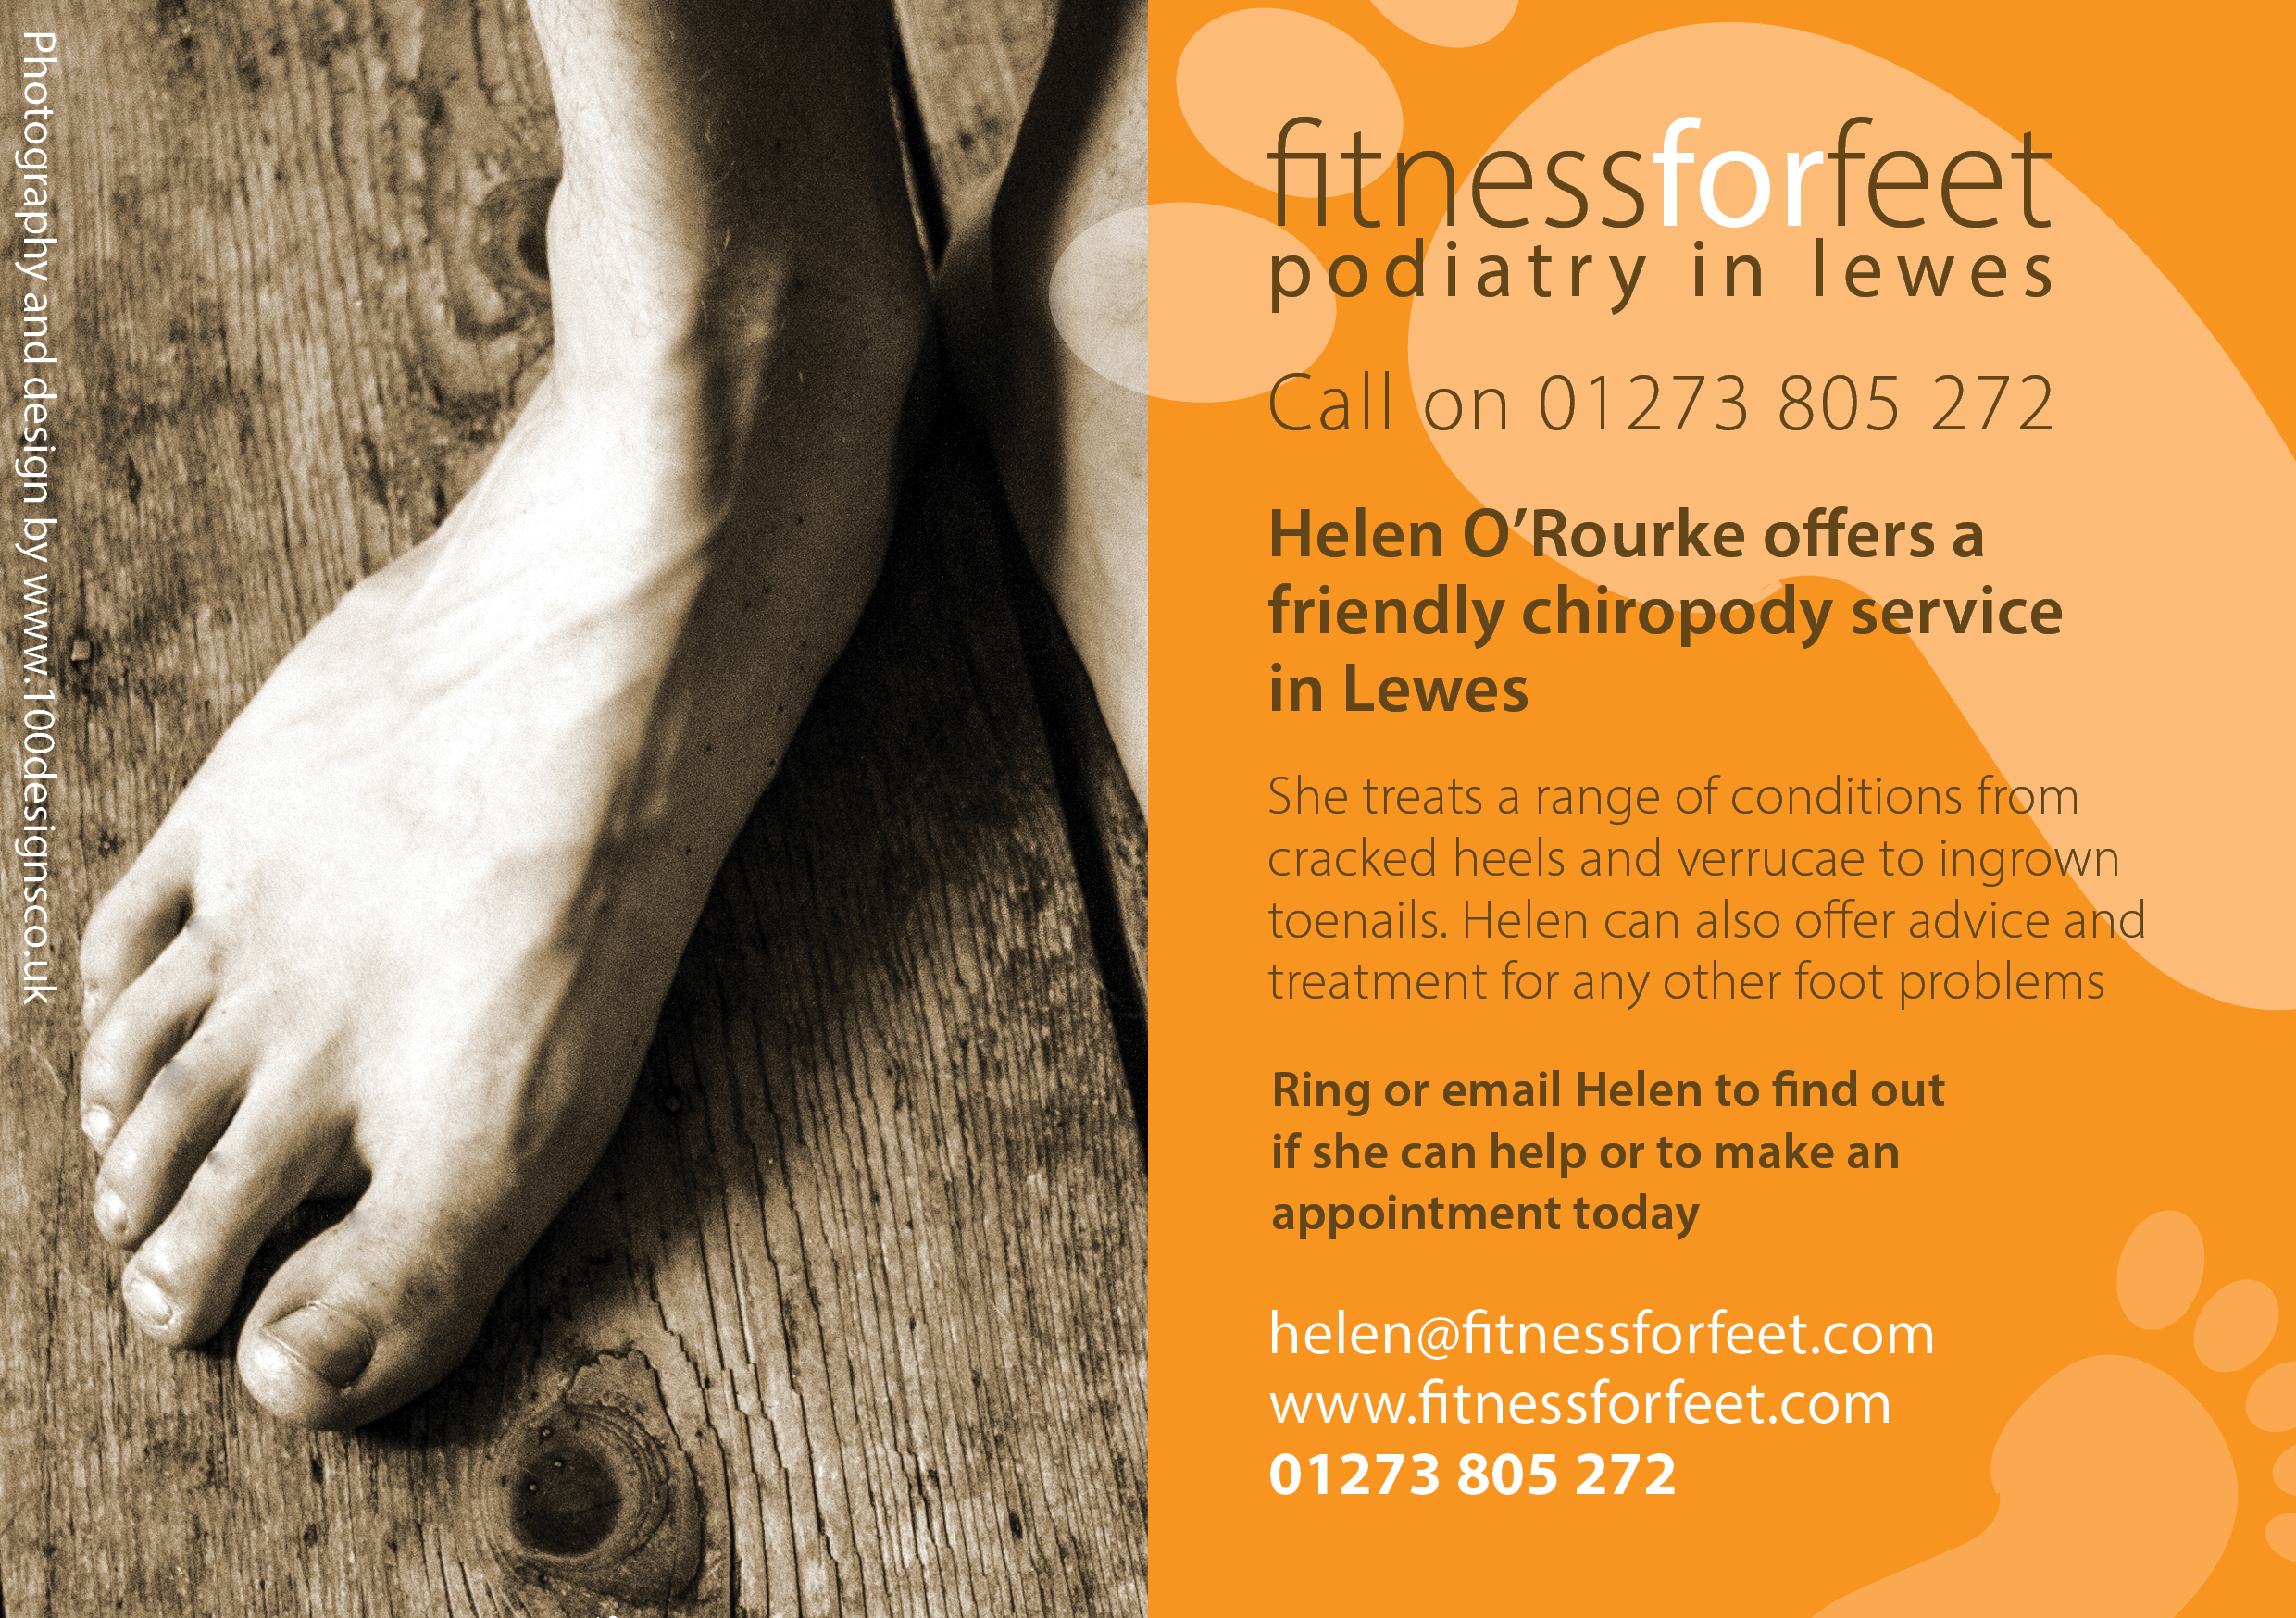 Fitness for Feet A5 Leaflet Front and Back2.jpg